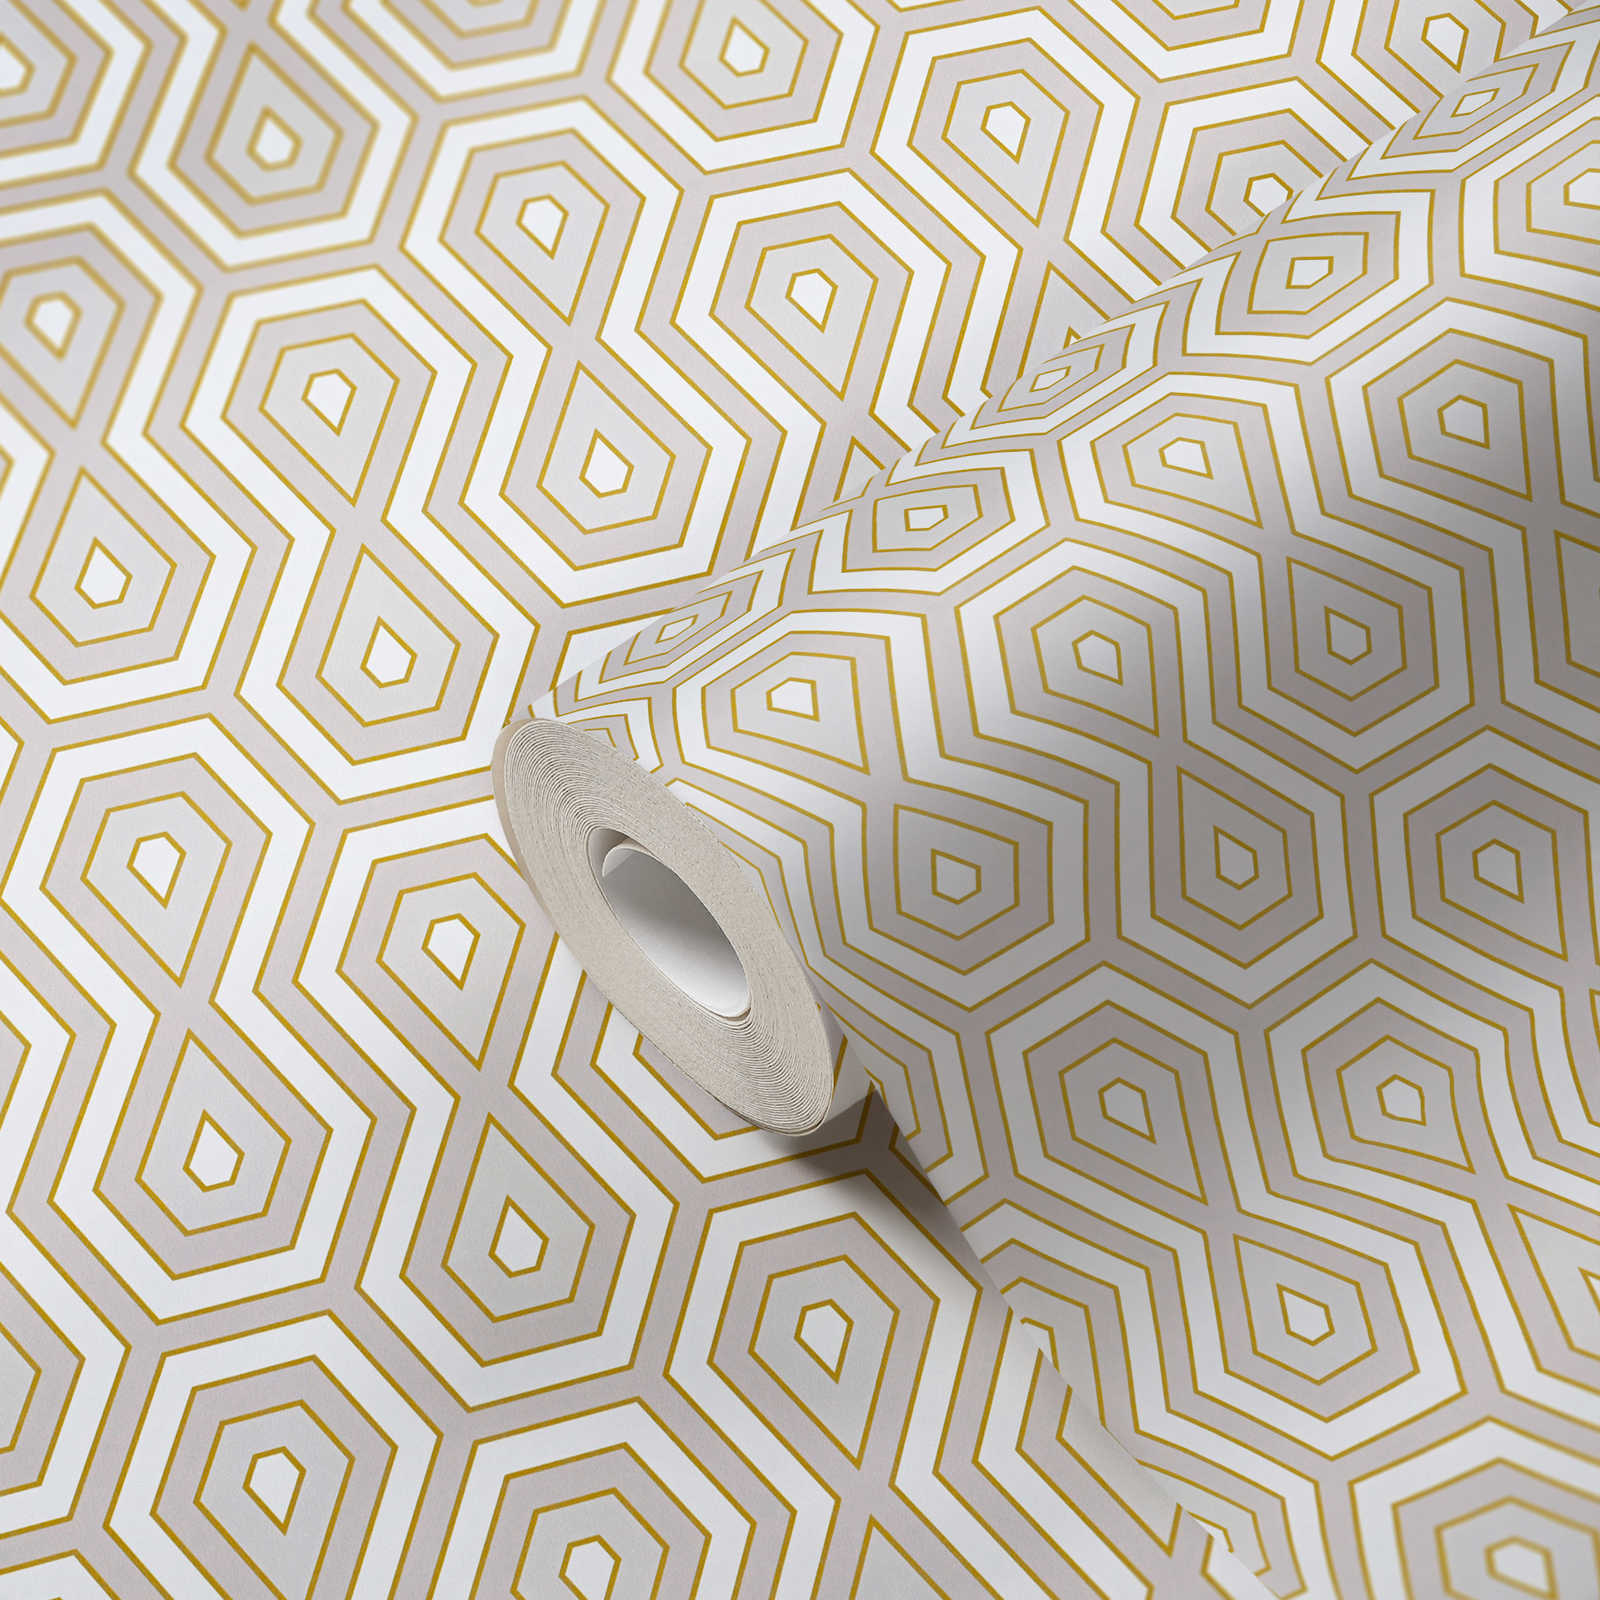             Wallpaper grey & gold with graphic design in retro style - gold, white, grey
        